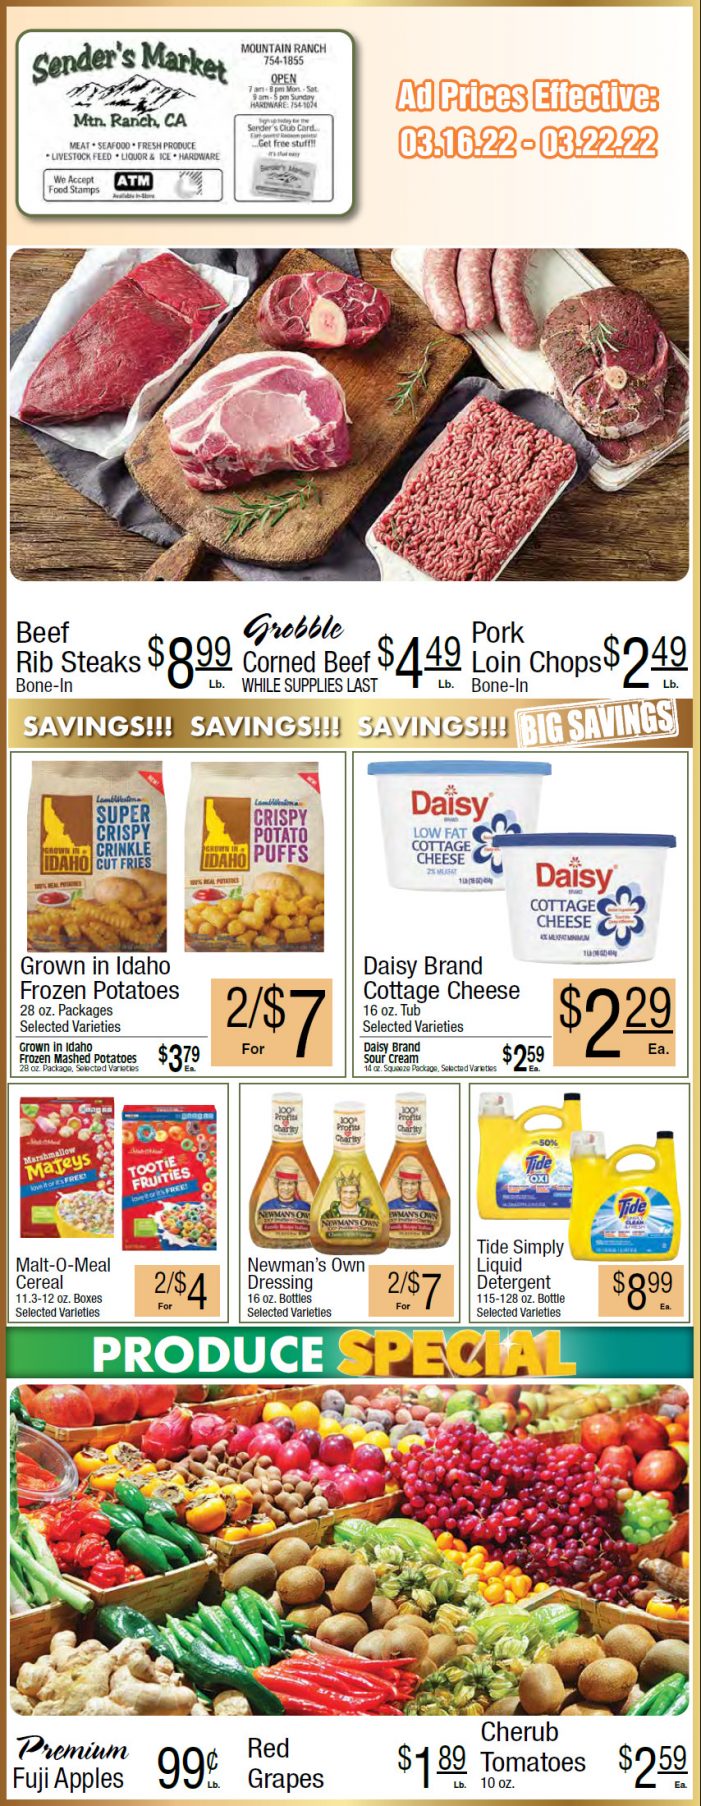 Sender’s Market’s Weekly Ad & Grocery Specials March 16th ~ March 22nd! Shop Local & Save!